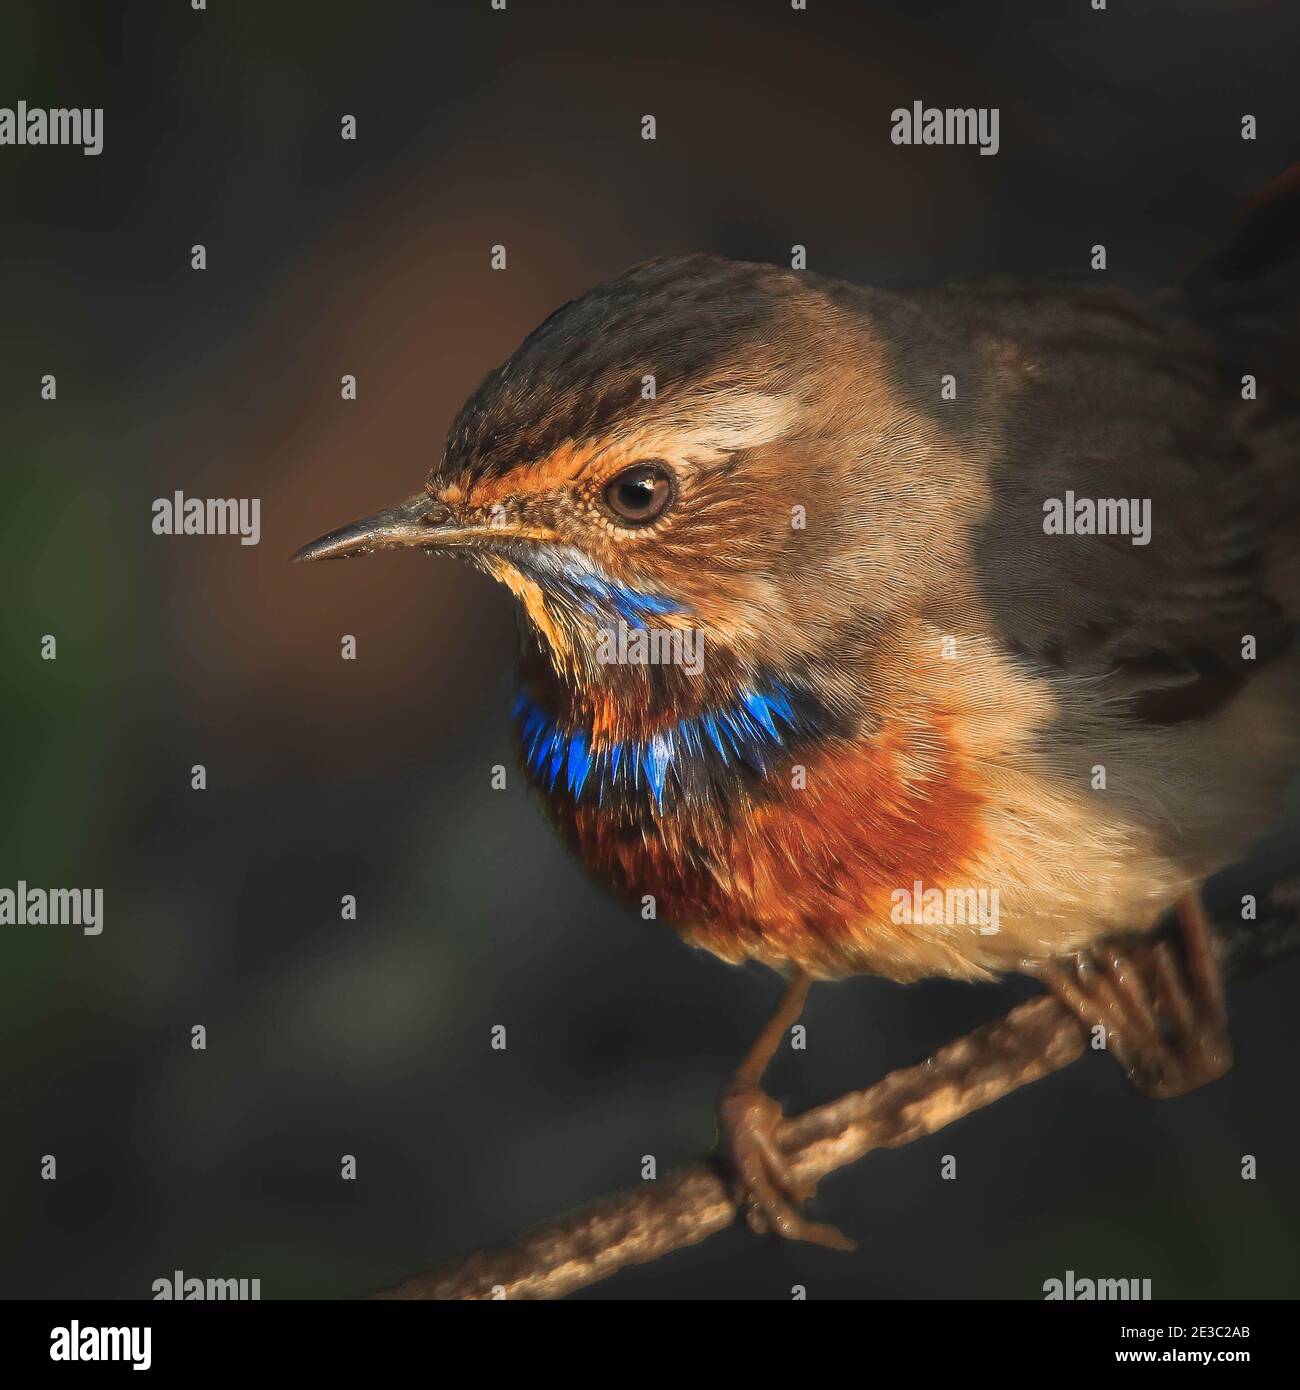 A closeup and sharp image of i Blue throat or Luscinia svecica bird which is selectively focused with a blur background Stock Photo